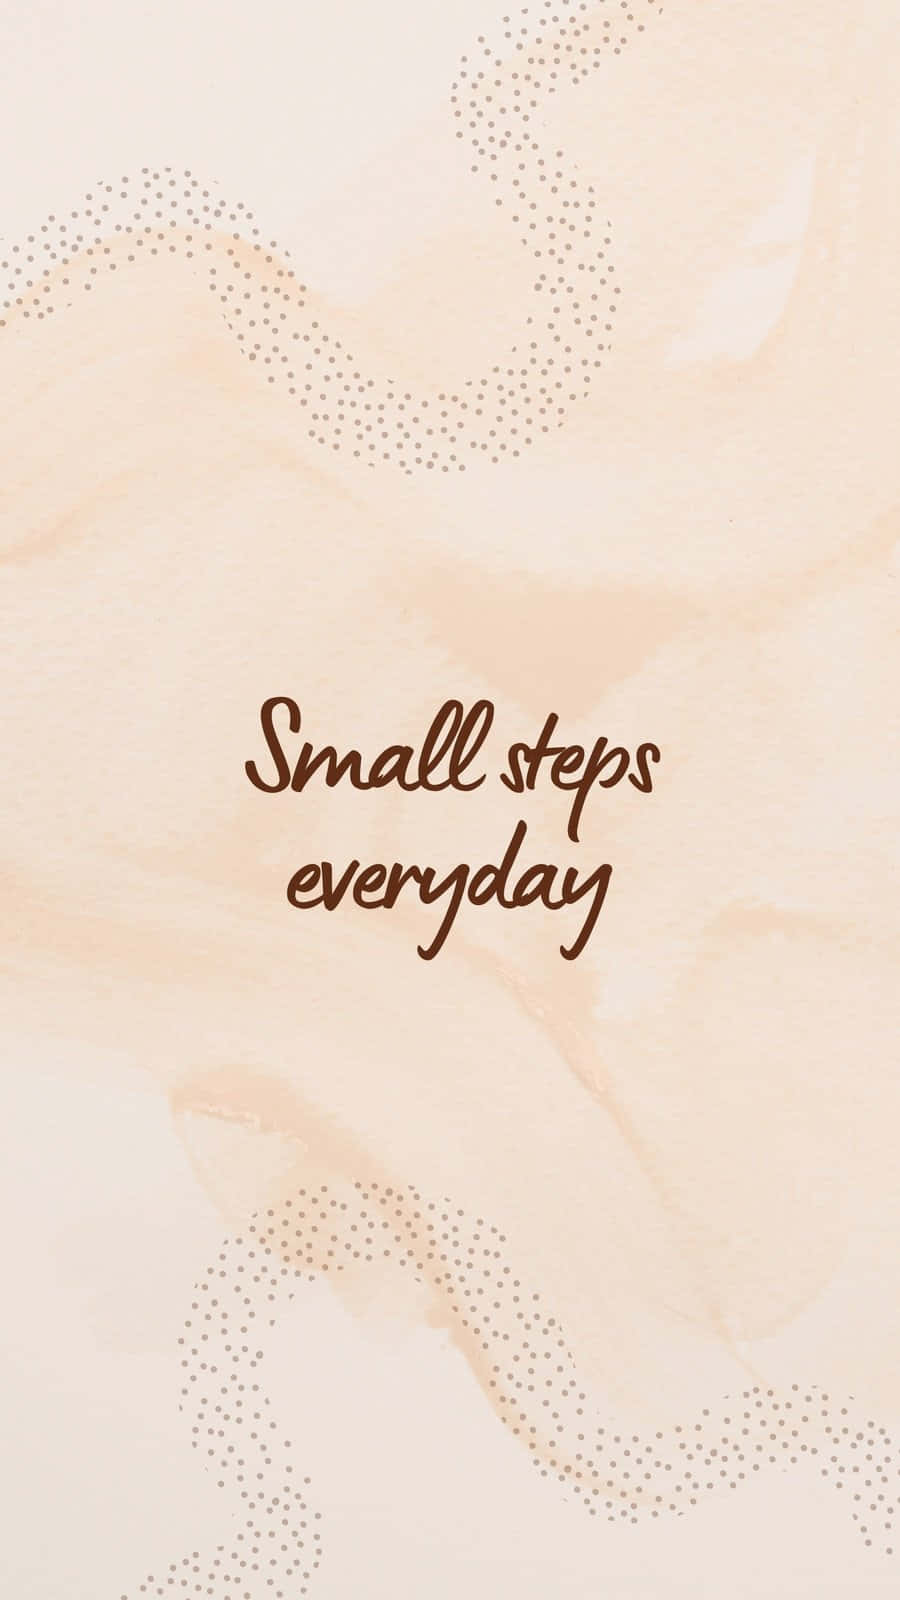 Inspirational Quote Small Steps Everyday Wallpaper